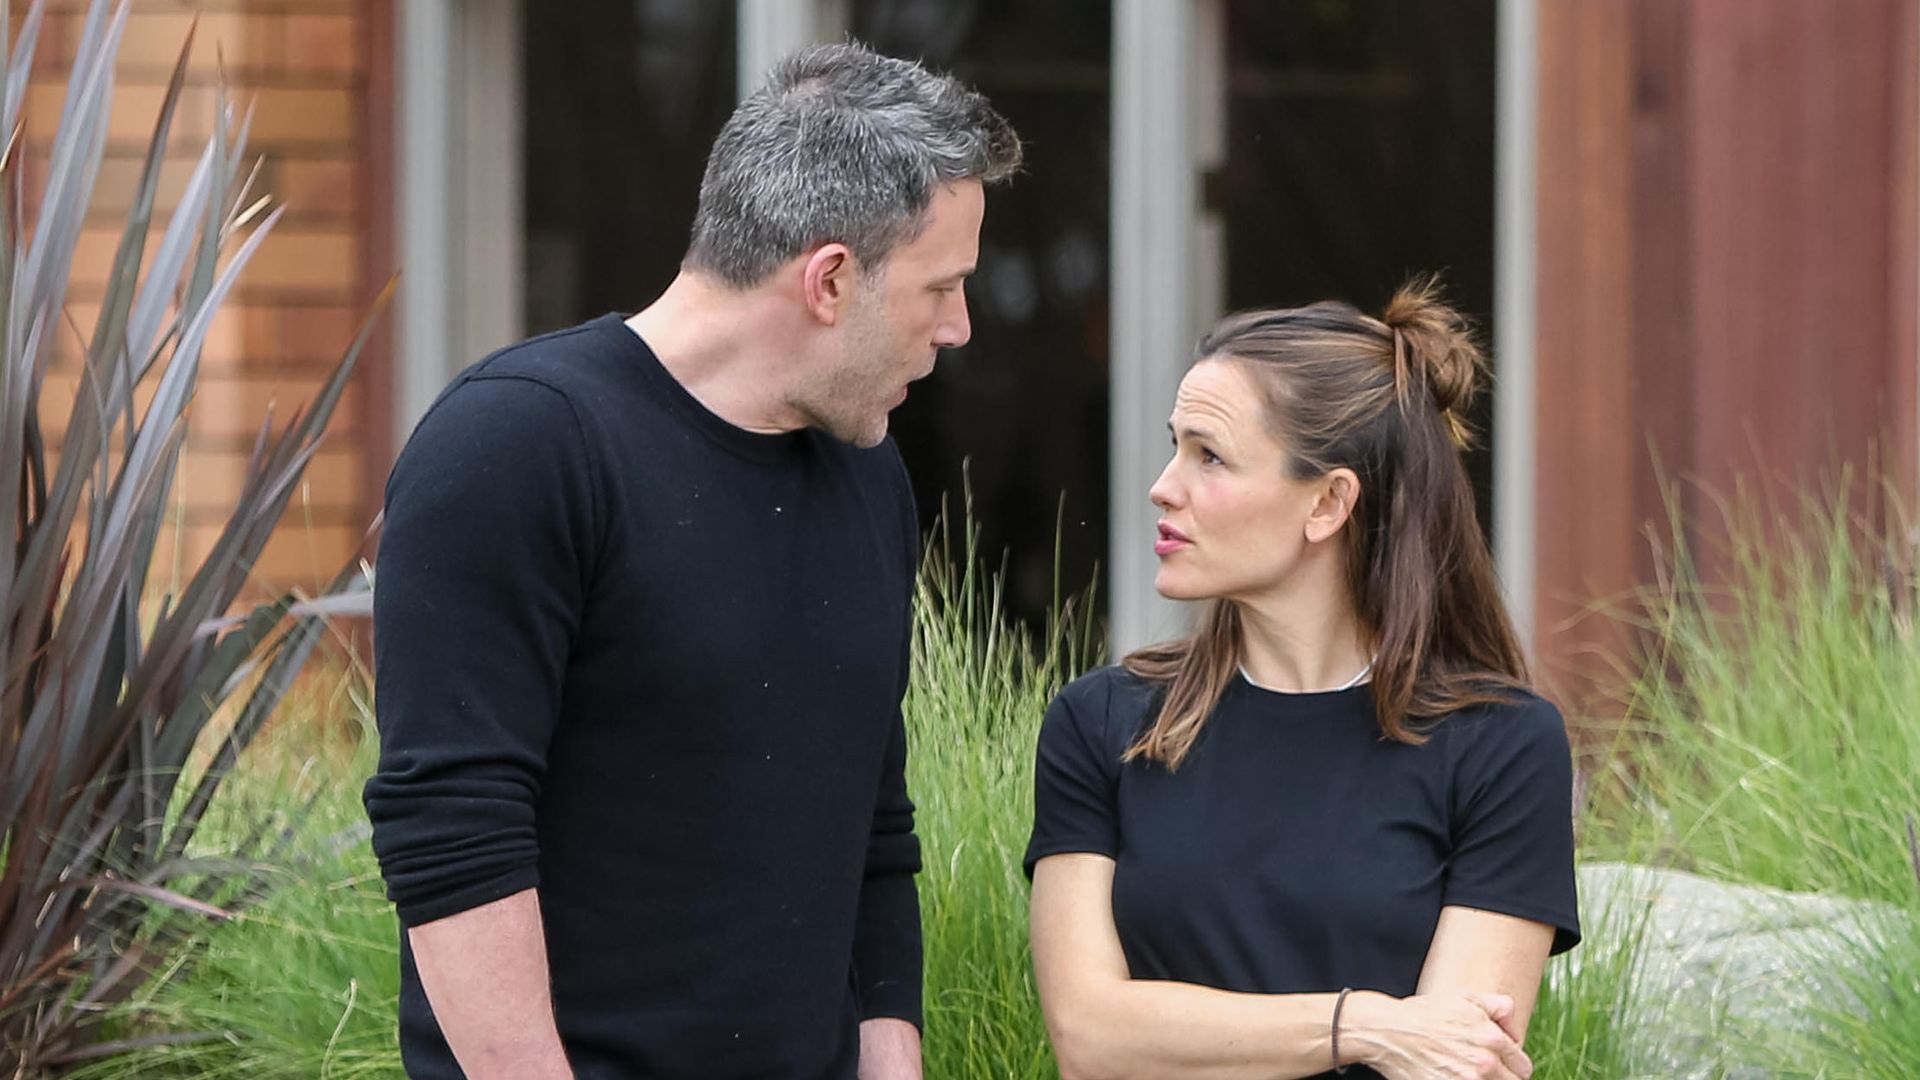 Ben Affleck and Jen Garner (seen here in L.A. in February 2020), divorced in 2018 and successfully co-parent their three kids.